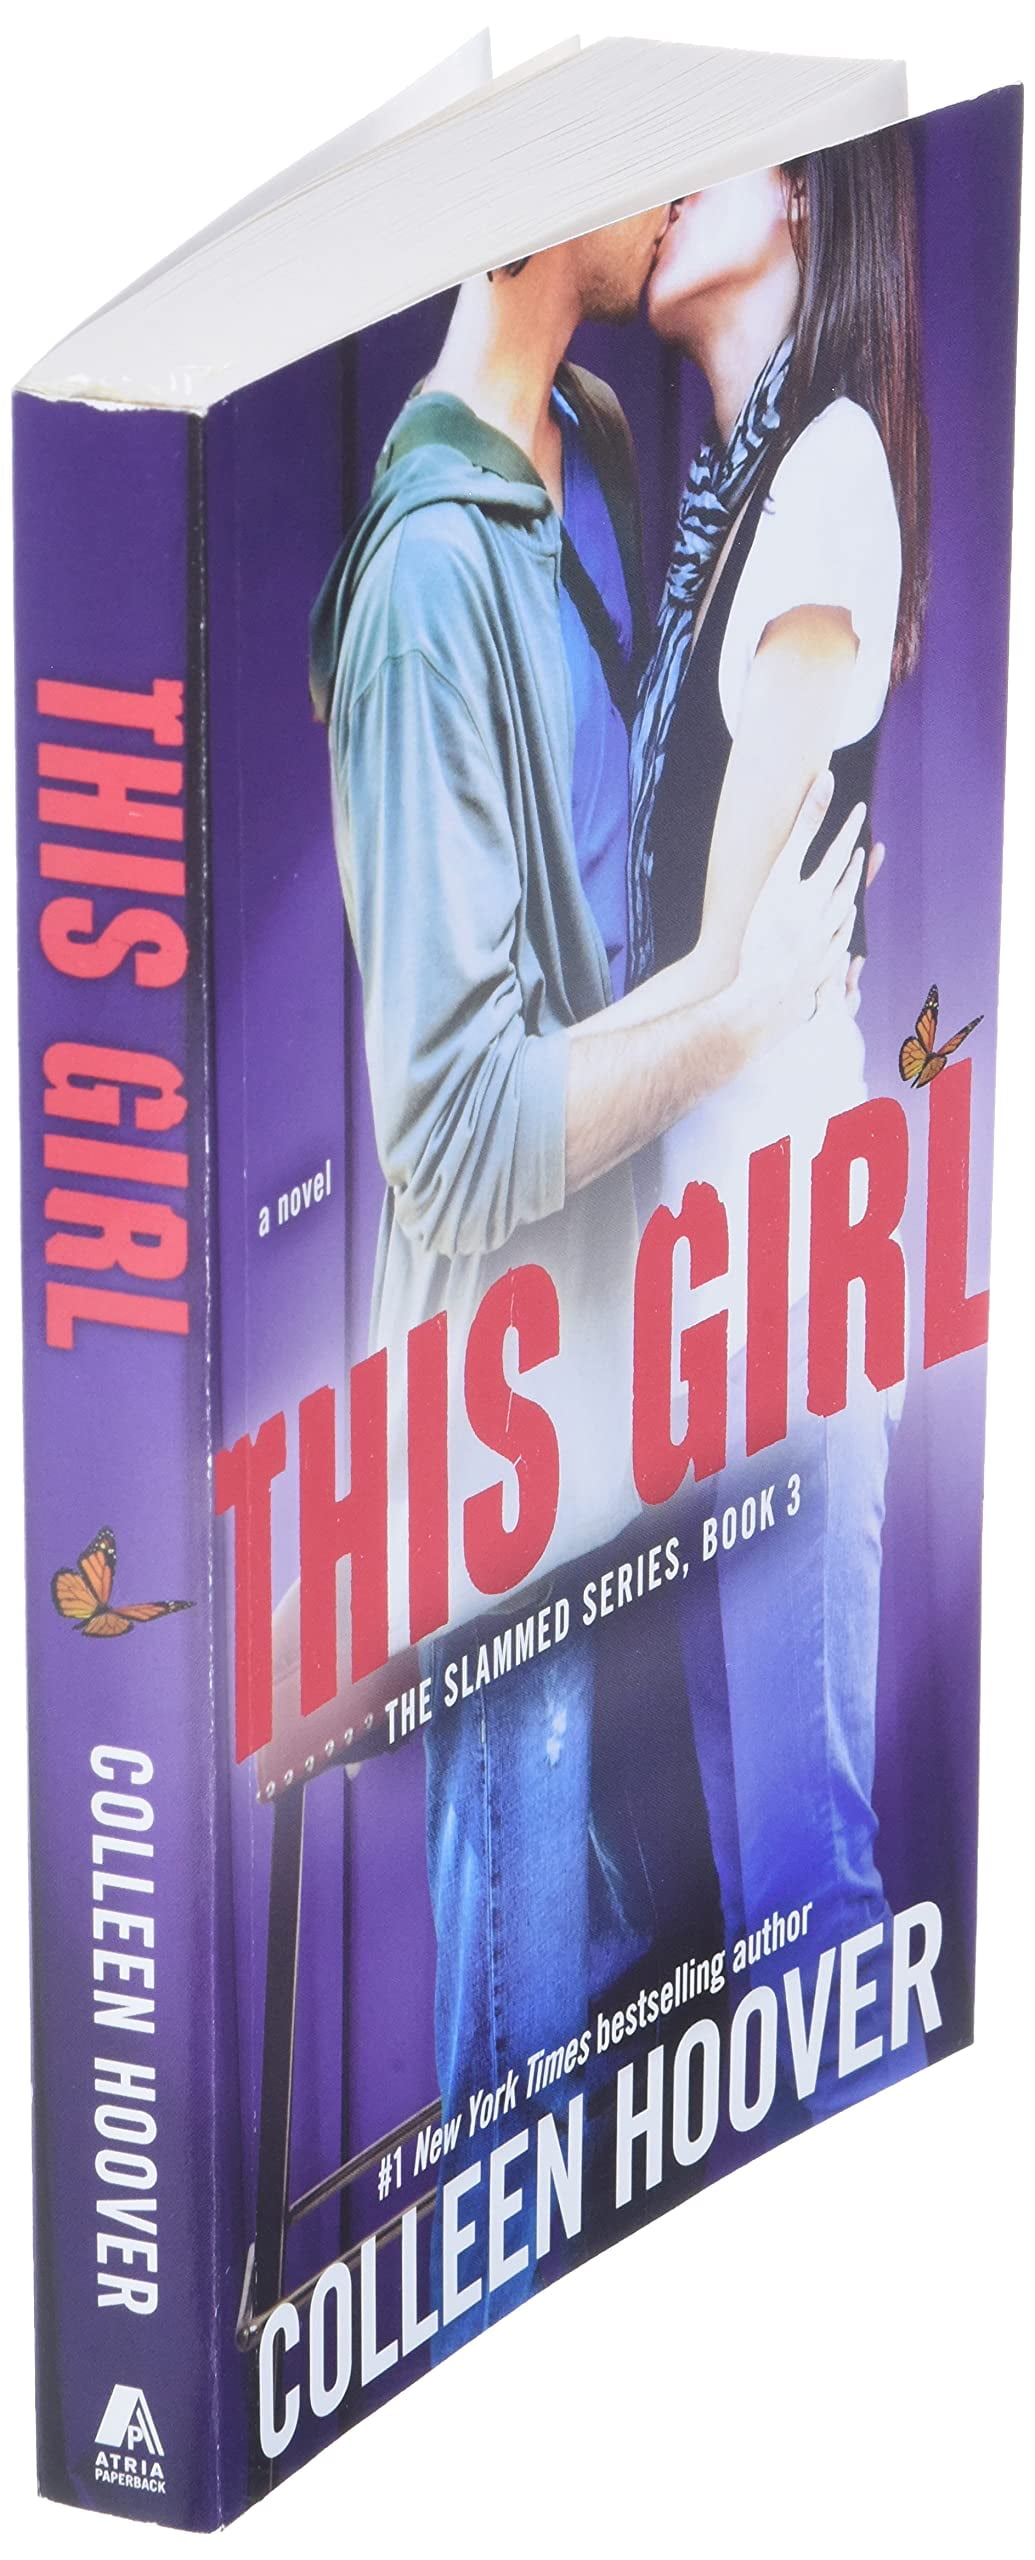 This Girl - by Colleen Hoover (Paperback)